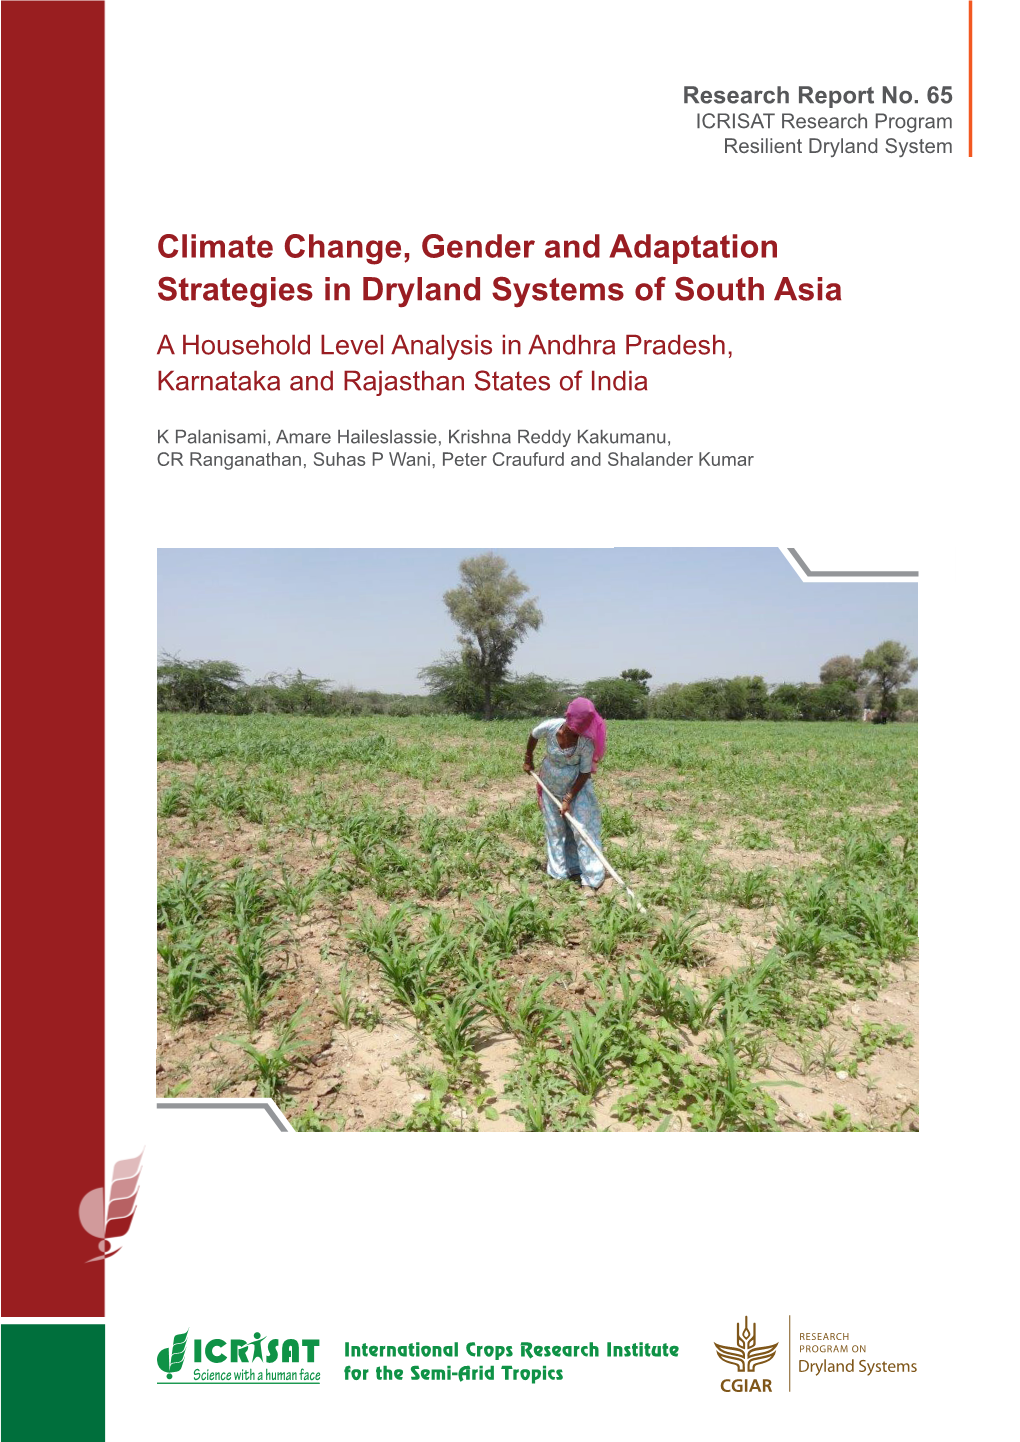 Climate Change, Gender and Adaptation Strategies in Dryland